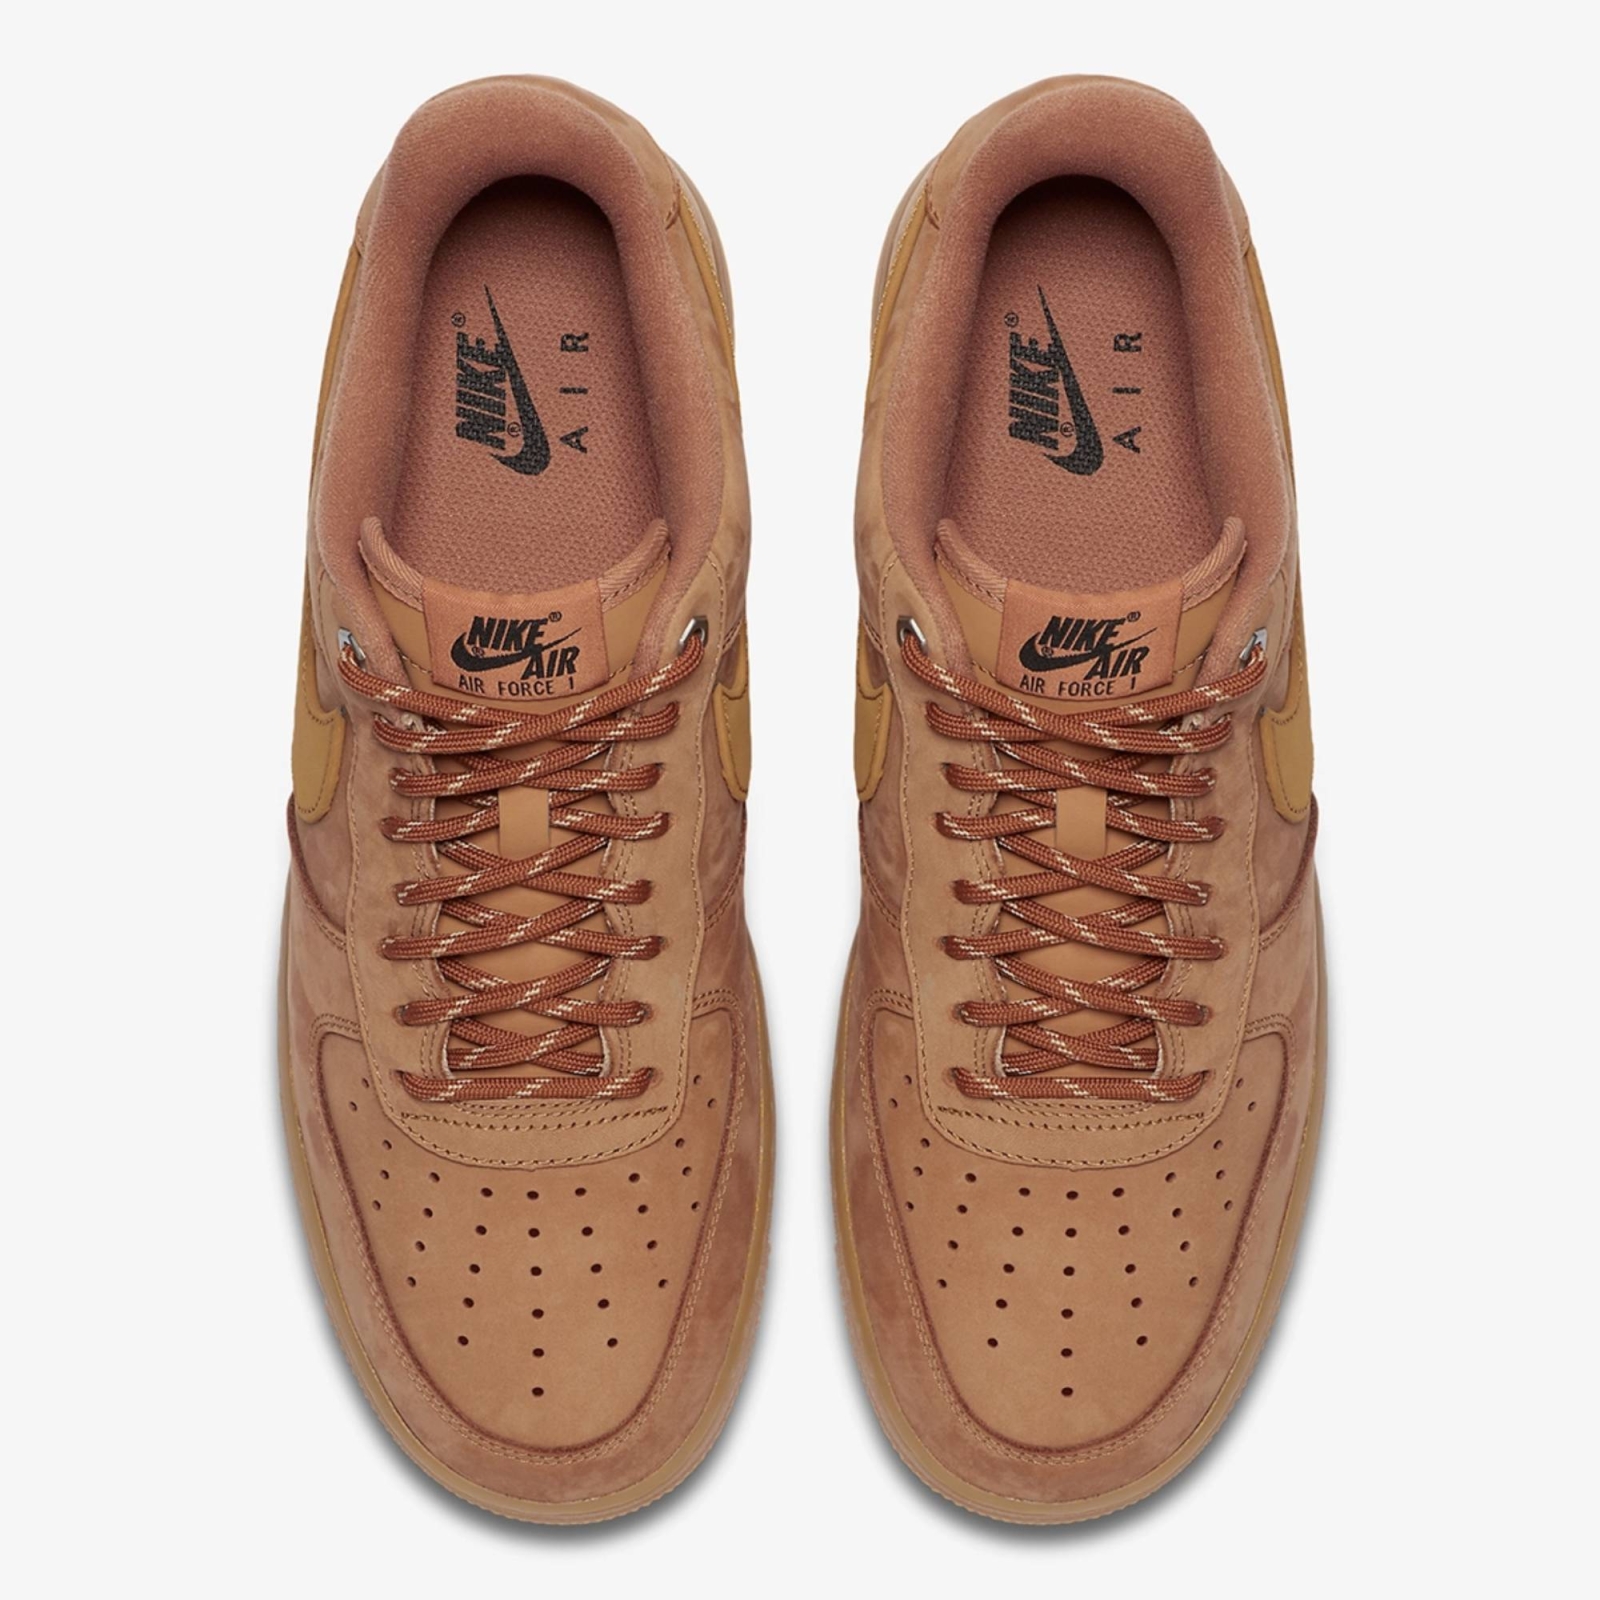 NIKE AIR FORCE 1 LOW FLAX